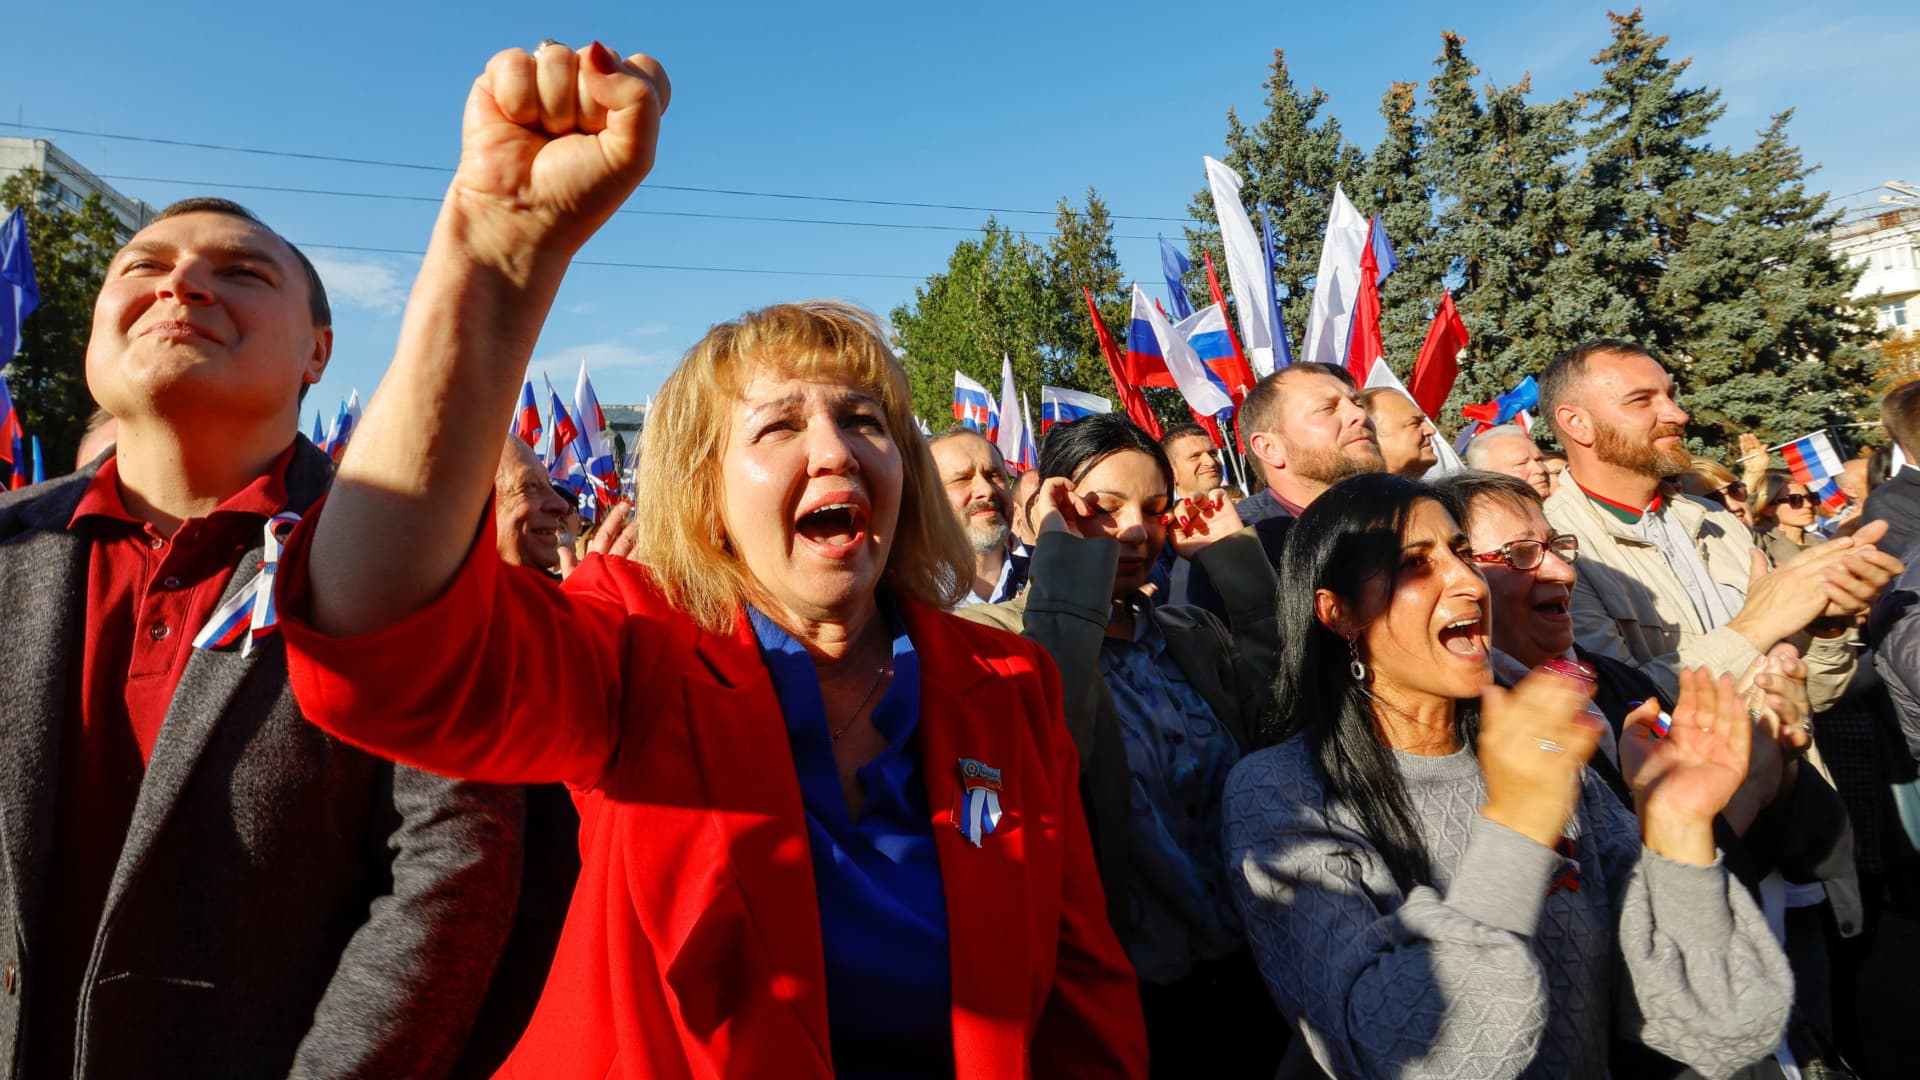 People attend an event marking the declared Russia's annexation of the Russian-controlled territories of four Ukraine's Donetsk, Luhansk, Kherson and Zaporizhzhia regions, after holding what Russian authorities called referendums in the occupied areas of Ukraine that were condemned by Kyiv and governments worldwide, in Luhansk, Russian-controlled Ukraine, September 30, 2022.